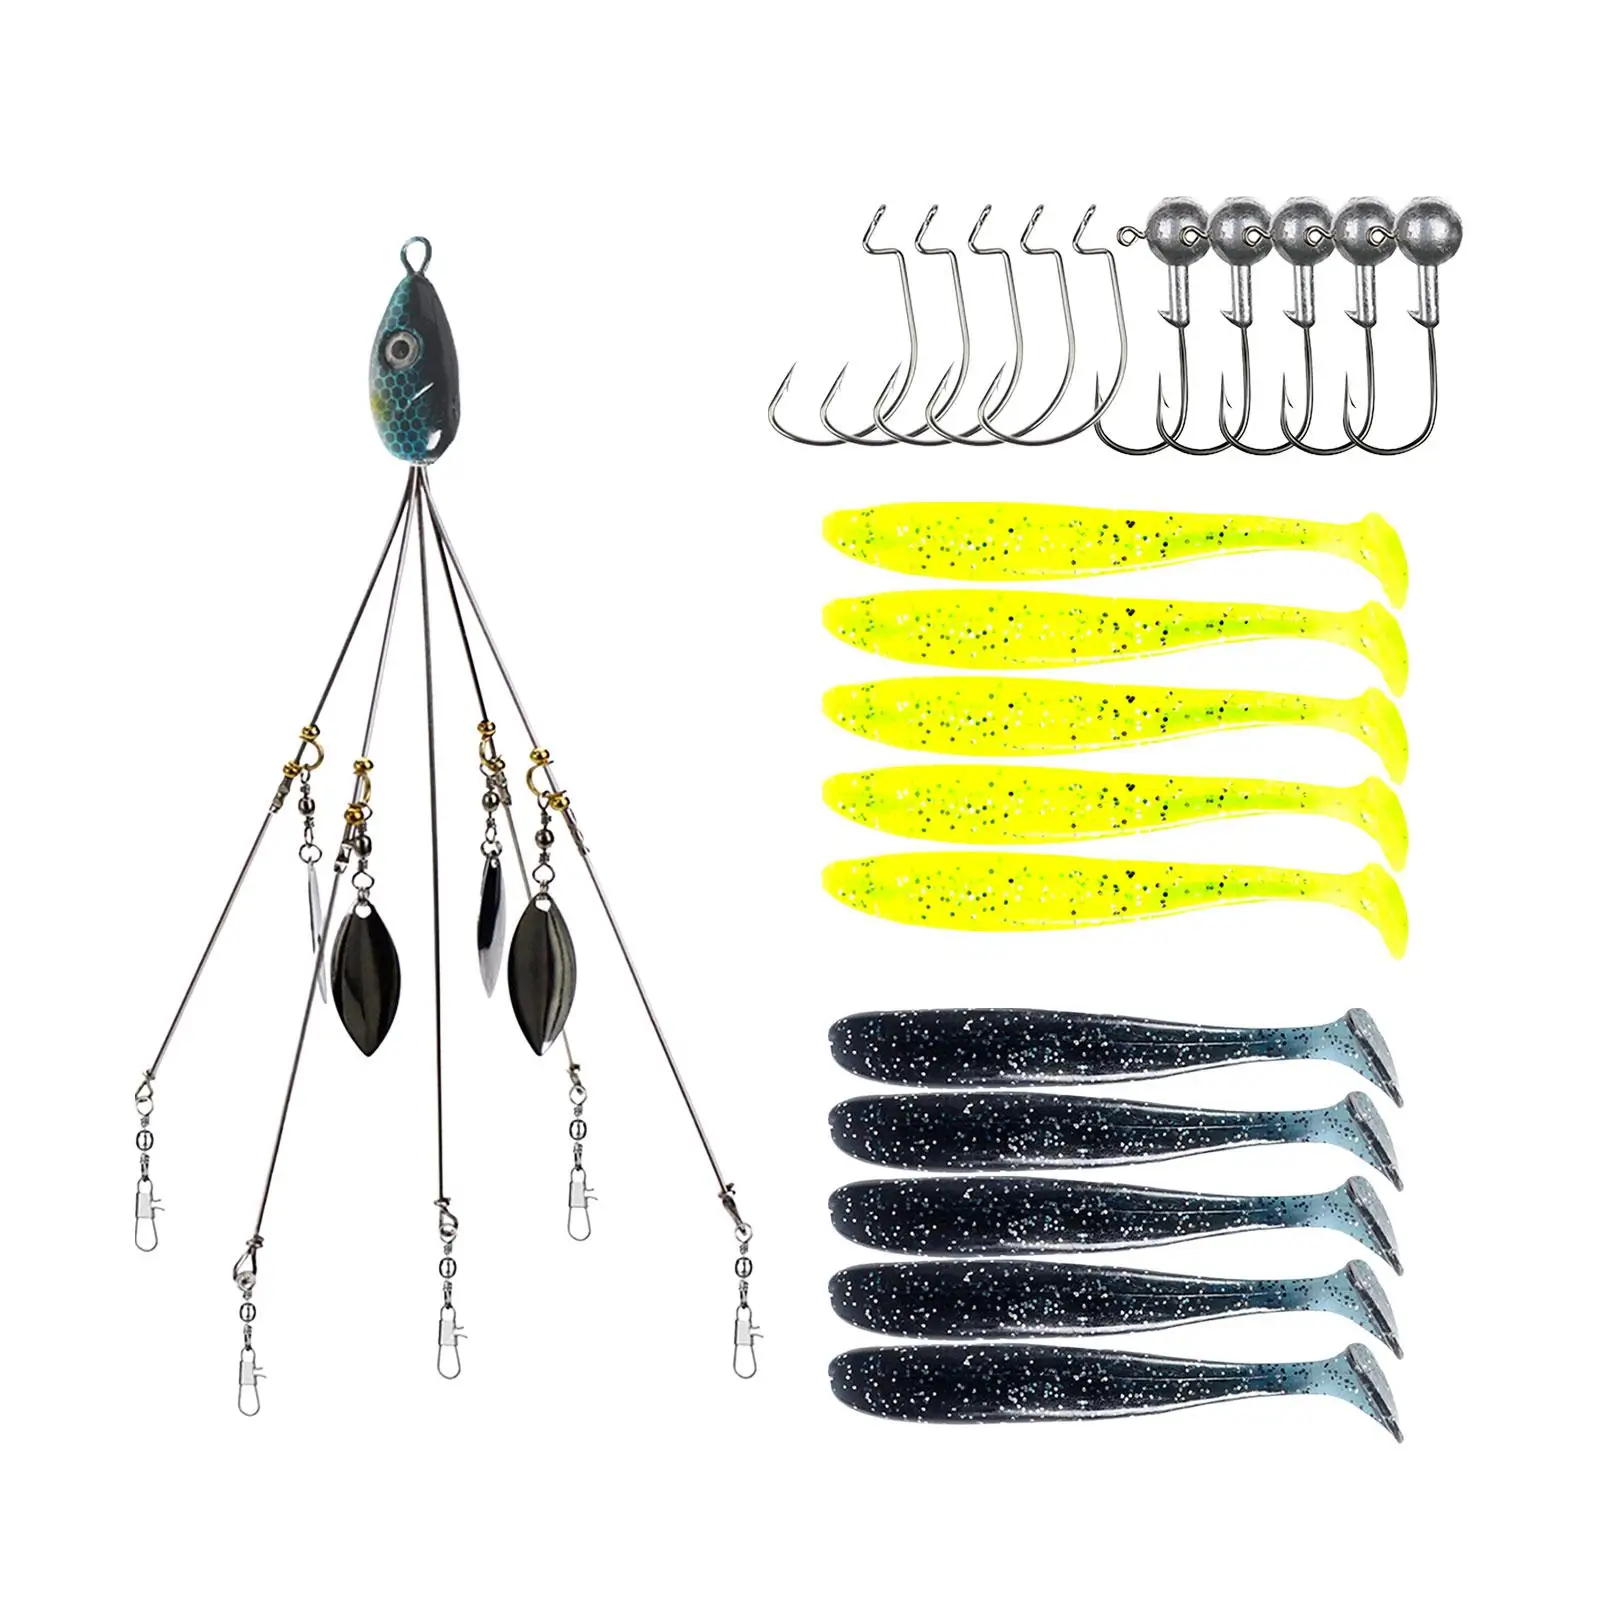 Umbrella Rig Freshwater/saltwater for Boat Trolling Fishing Rig Set A Rig Fishing Lure for Perch Trout Bass Walleye Pickerel